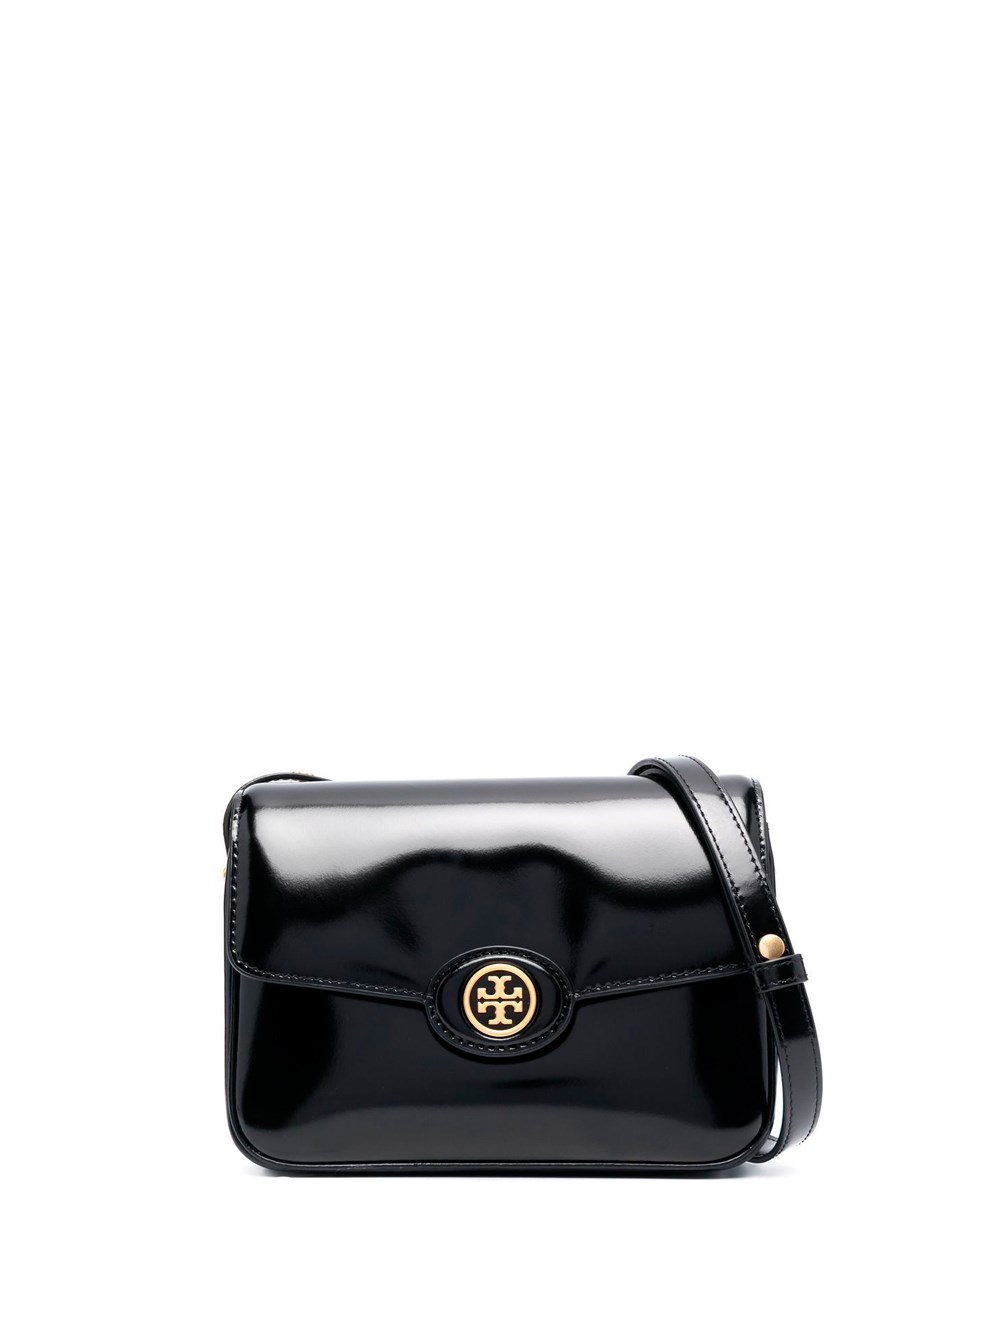 Robinson Convertible Shoulder Bag by Tory Burch Accessories for $43